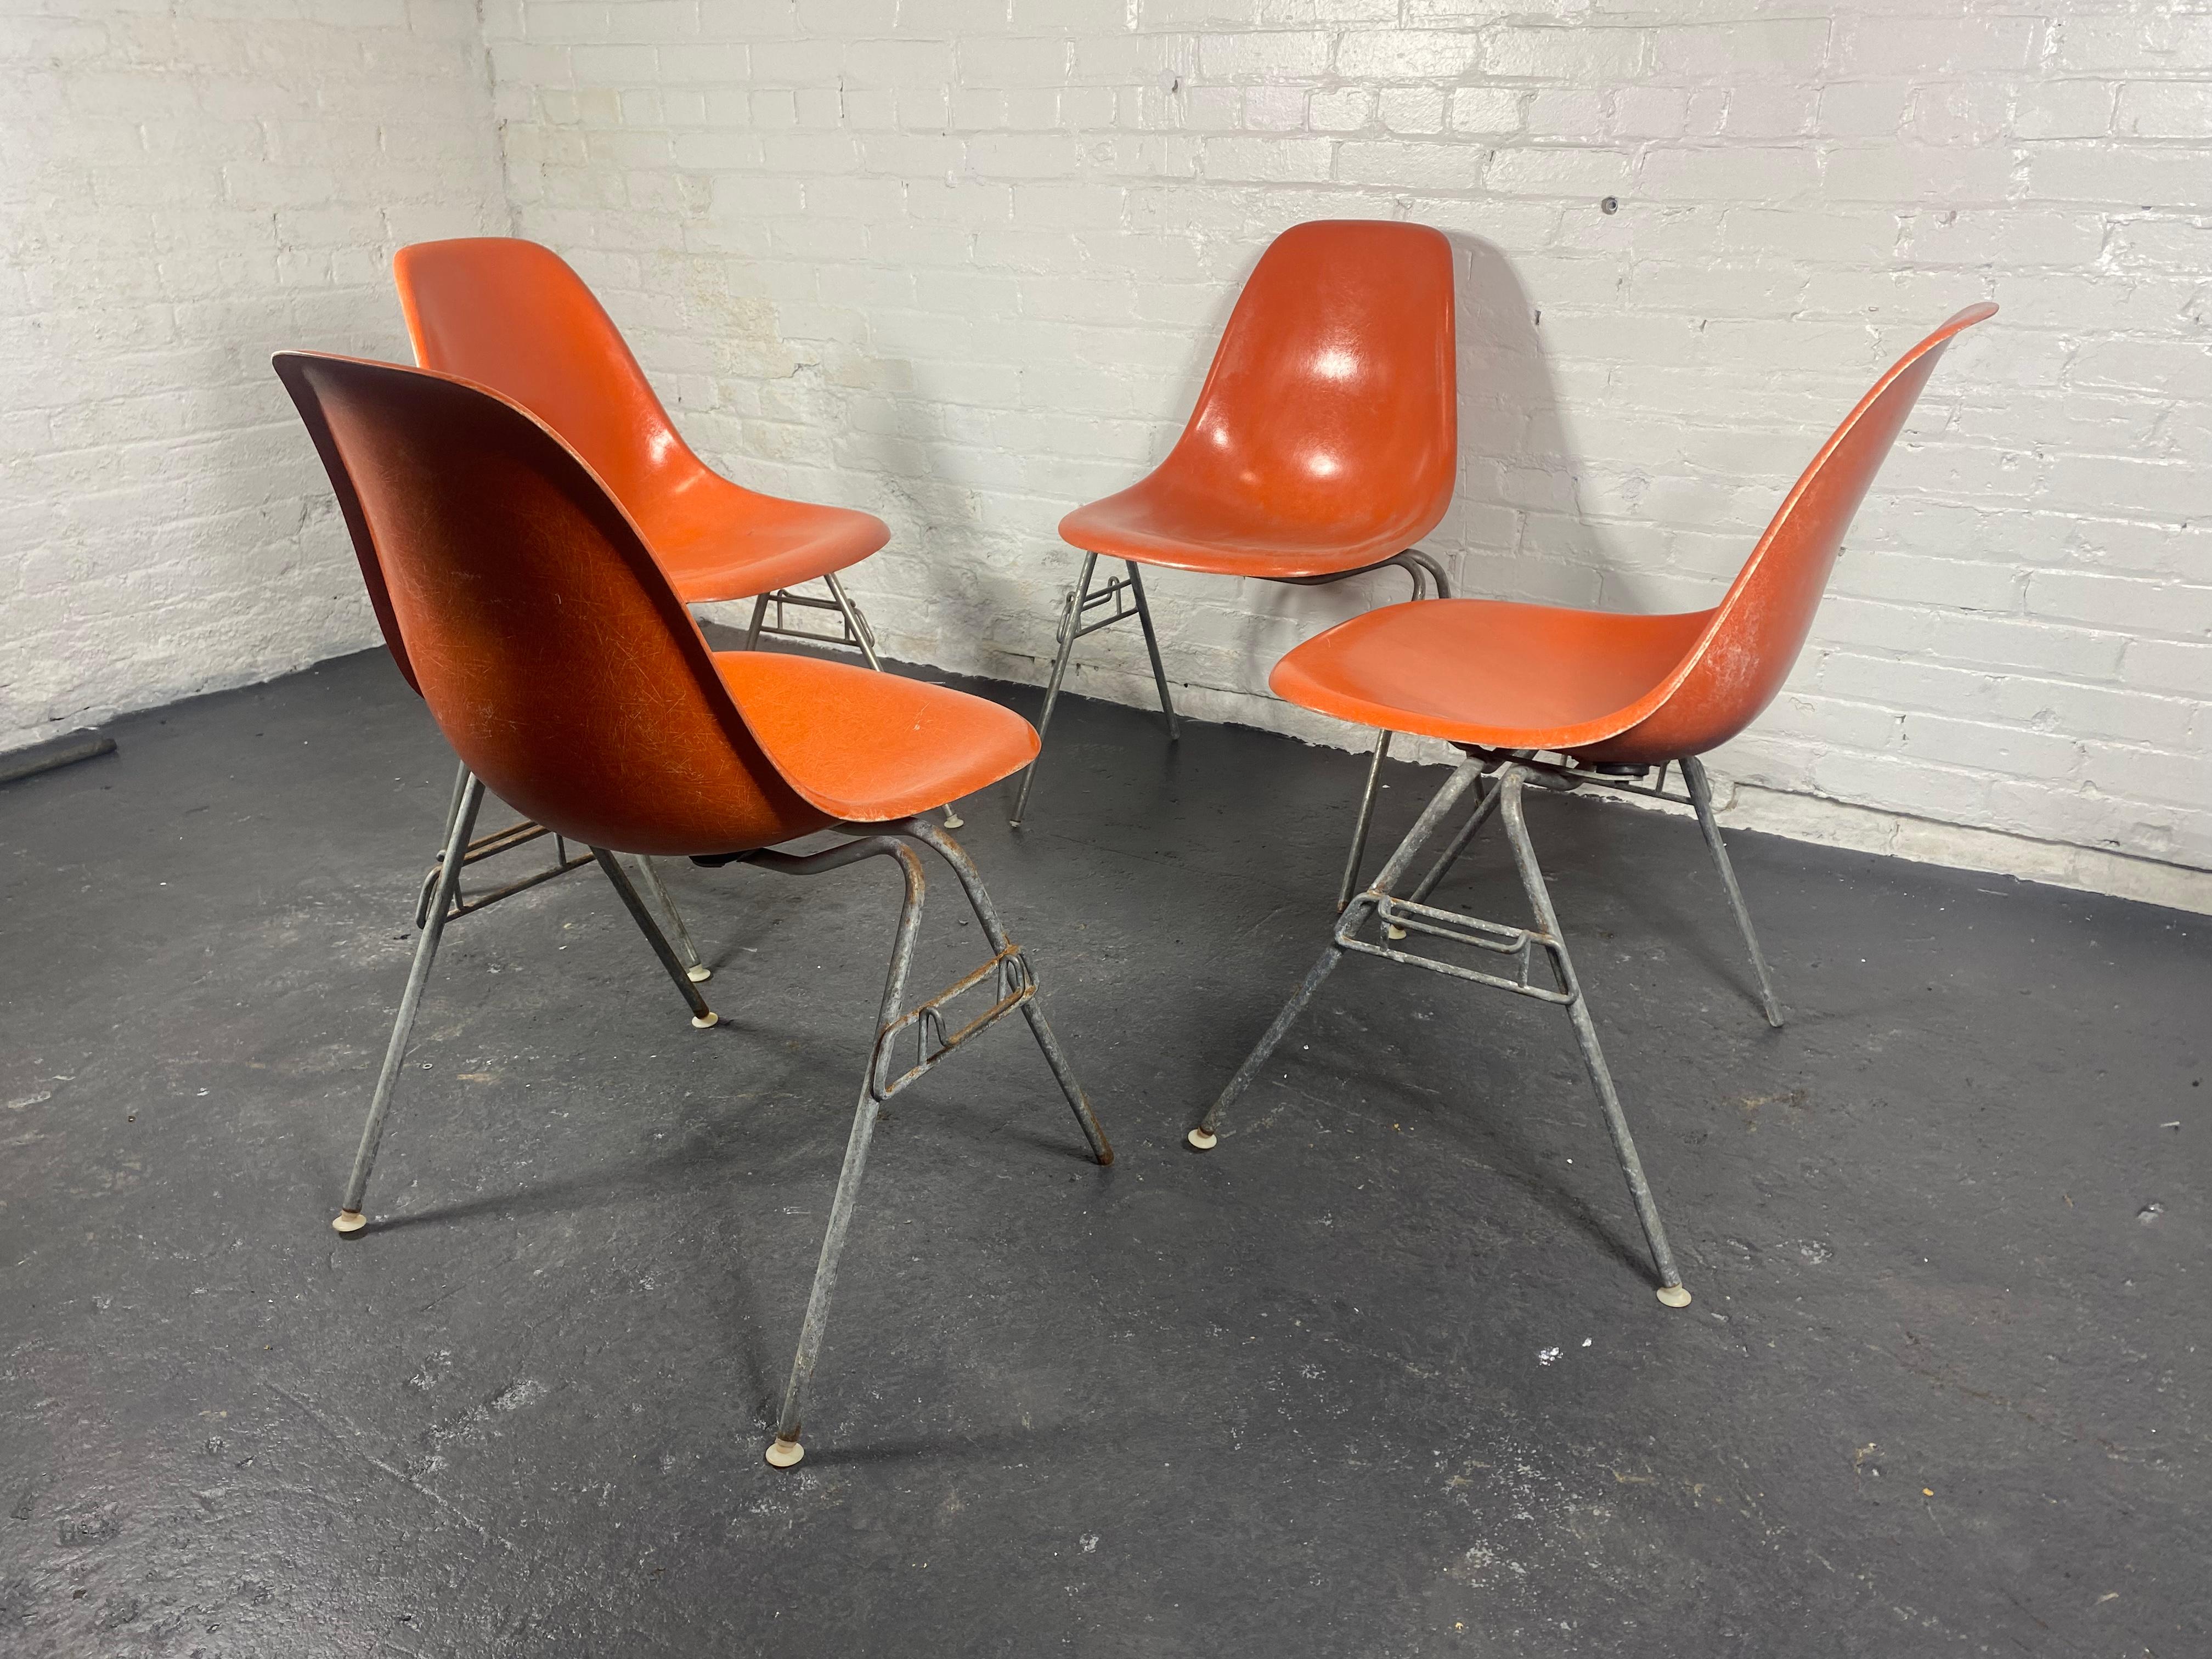 SET 4 DSS Stacking Chairs, Charles & Ray Eames, Herman Miller, Orange Fiberglass In Good Condition For Sale In Buffalo, NY